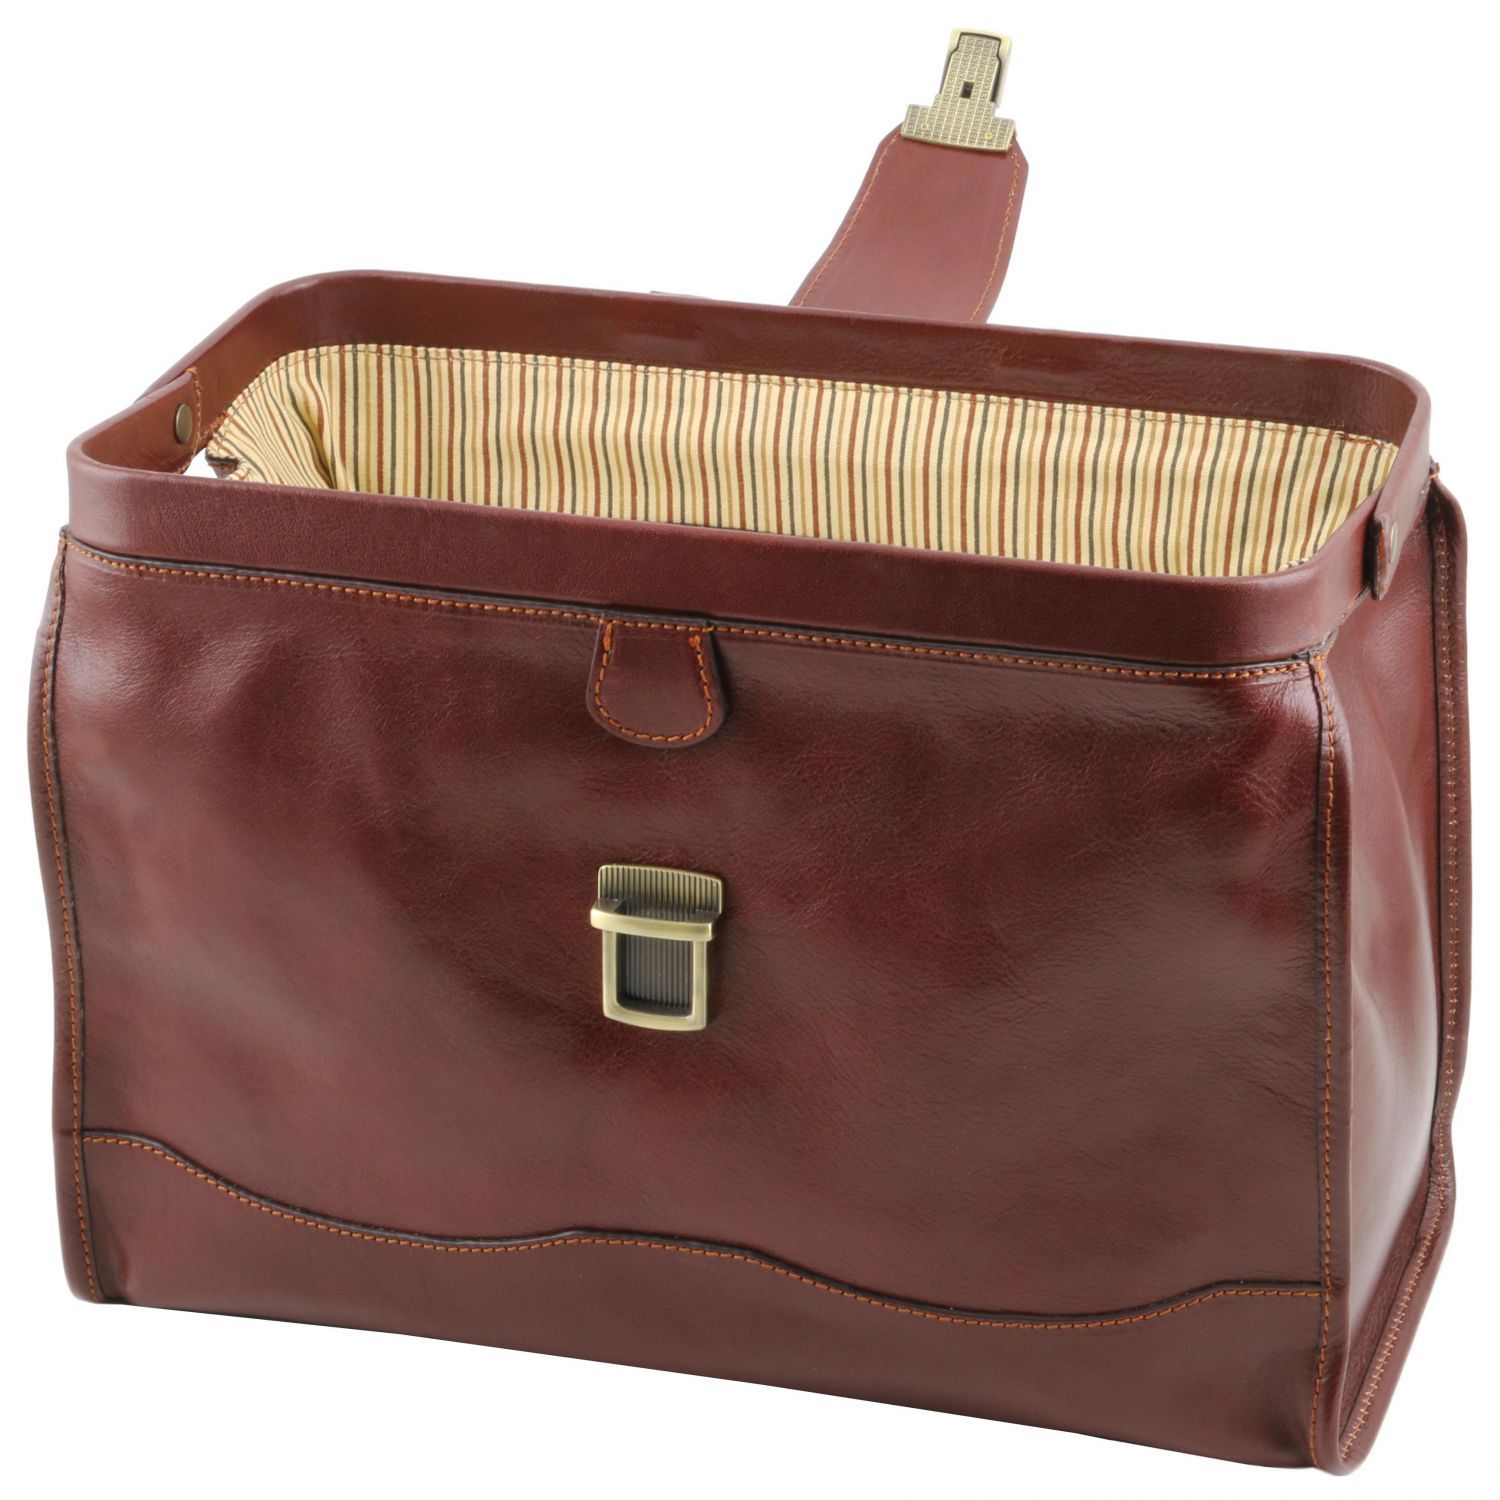 Full grain LEATHER doctor's bag with metal zip and front pocket